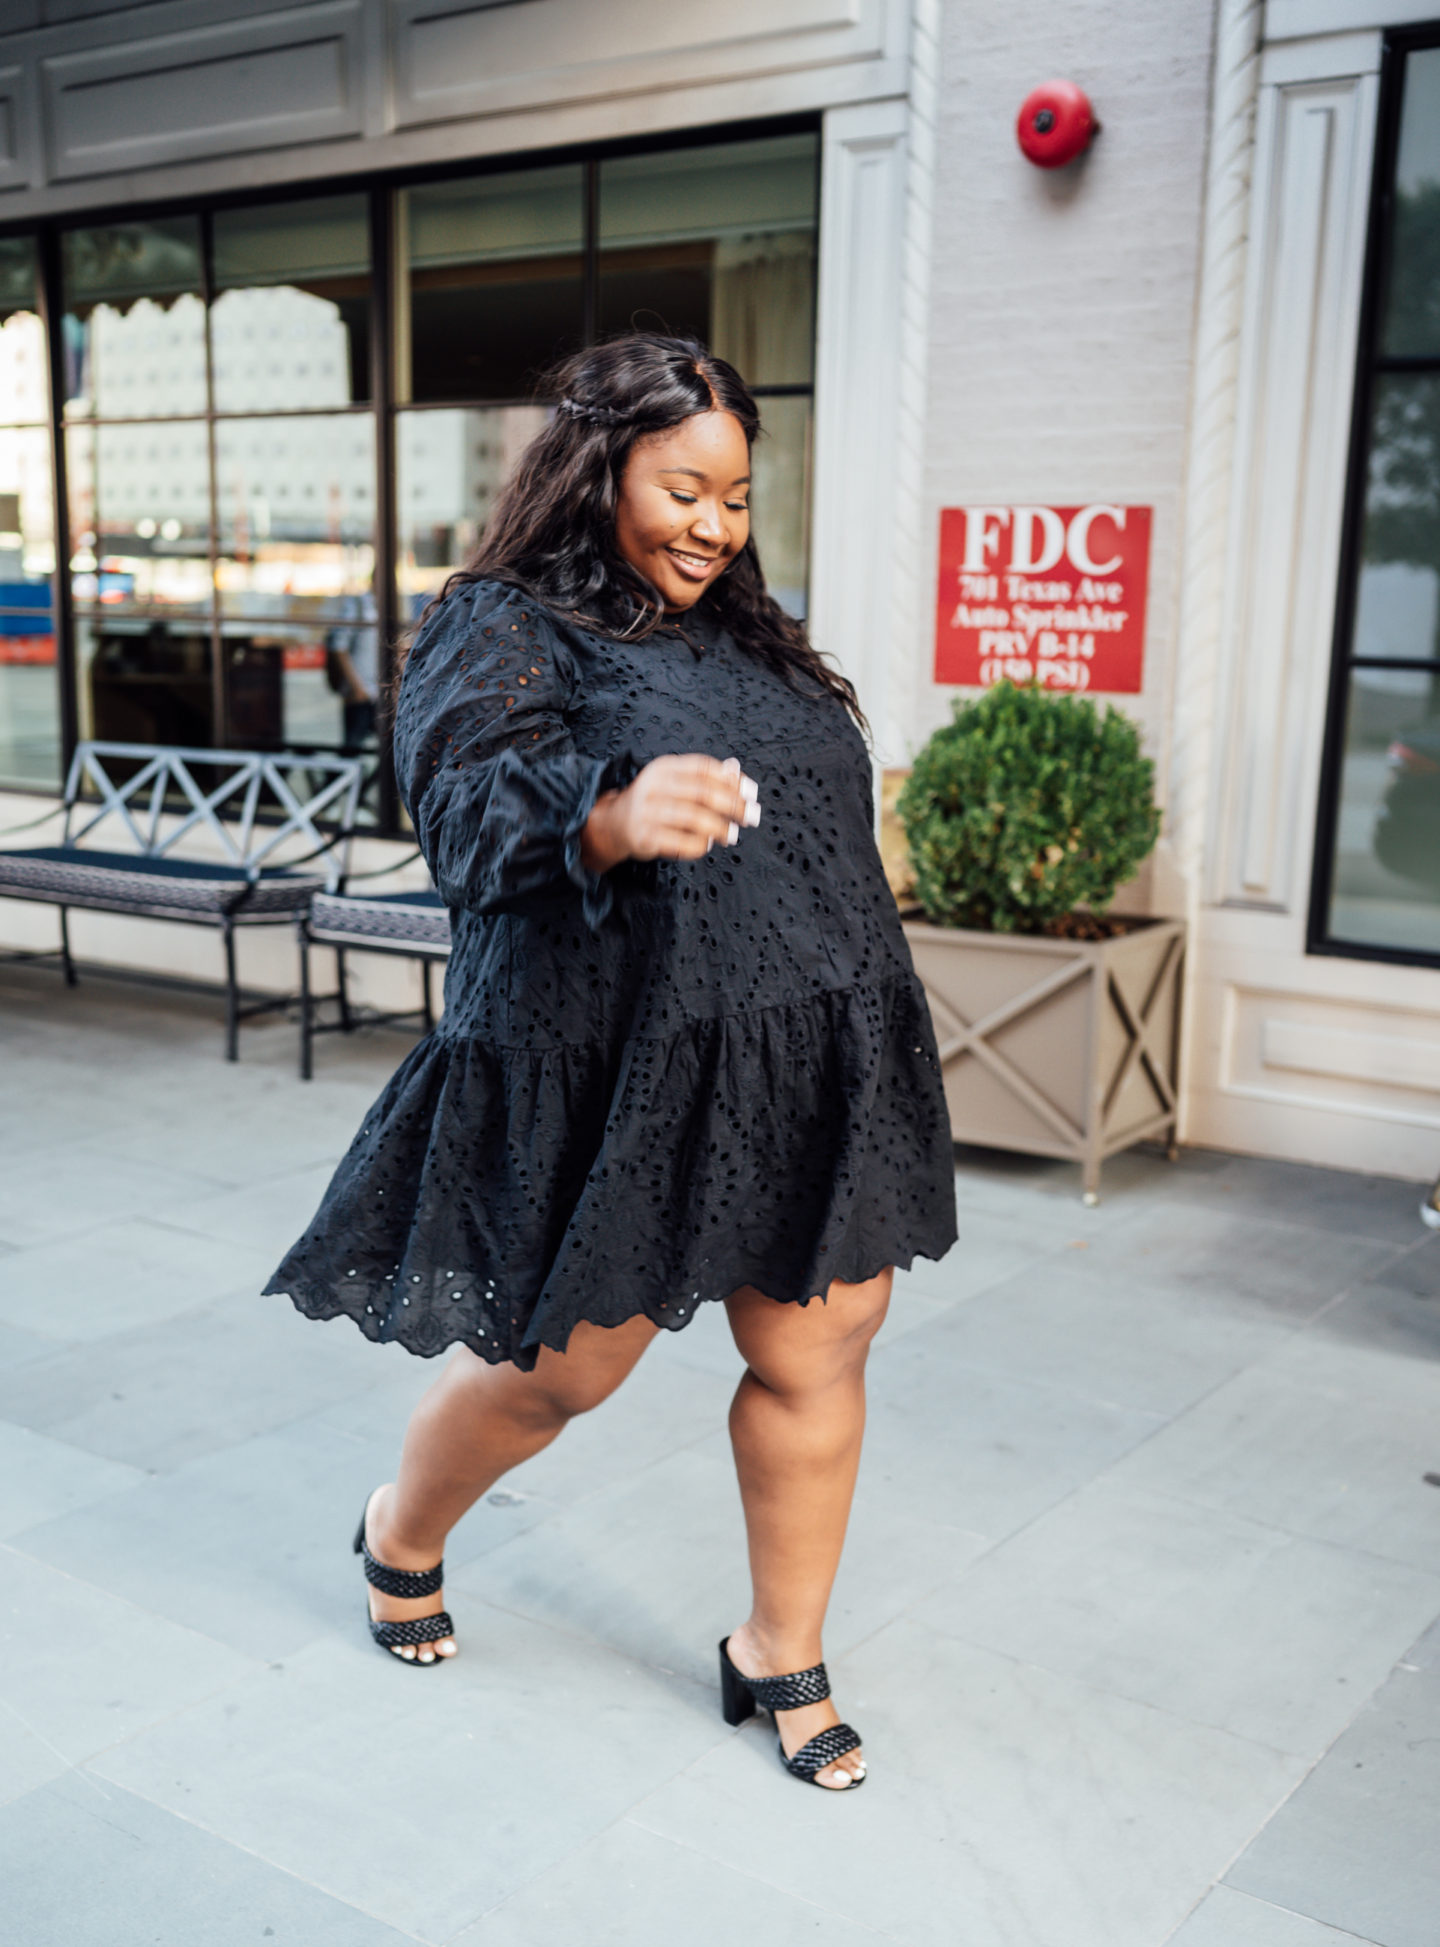 Try this plus size dress for your date night outfit - From Head To Curve